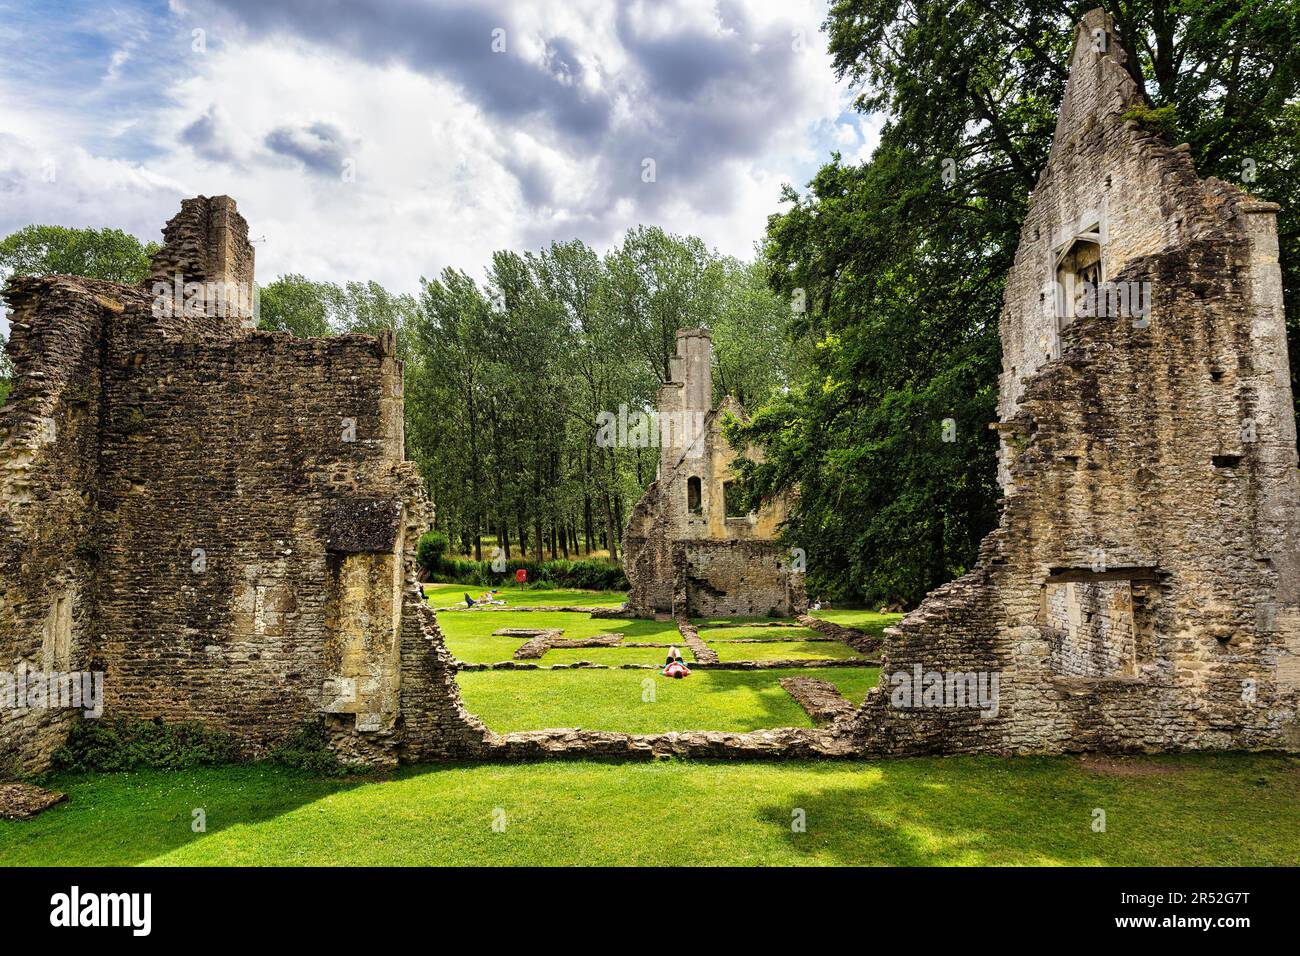 Ruines de Minster Lovell, Oxfordshire, Cotswolds, Angleterre, Royaume-Uni Banque D'Images